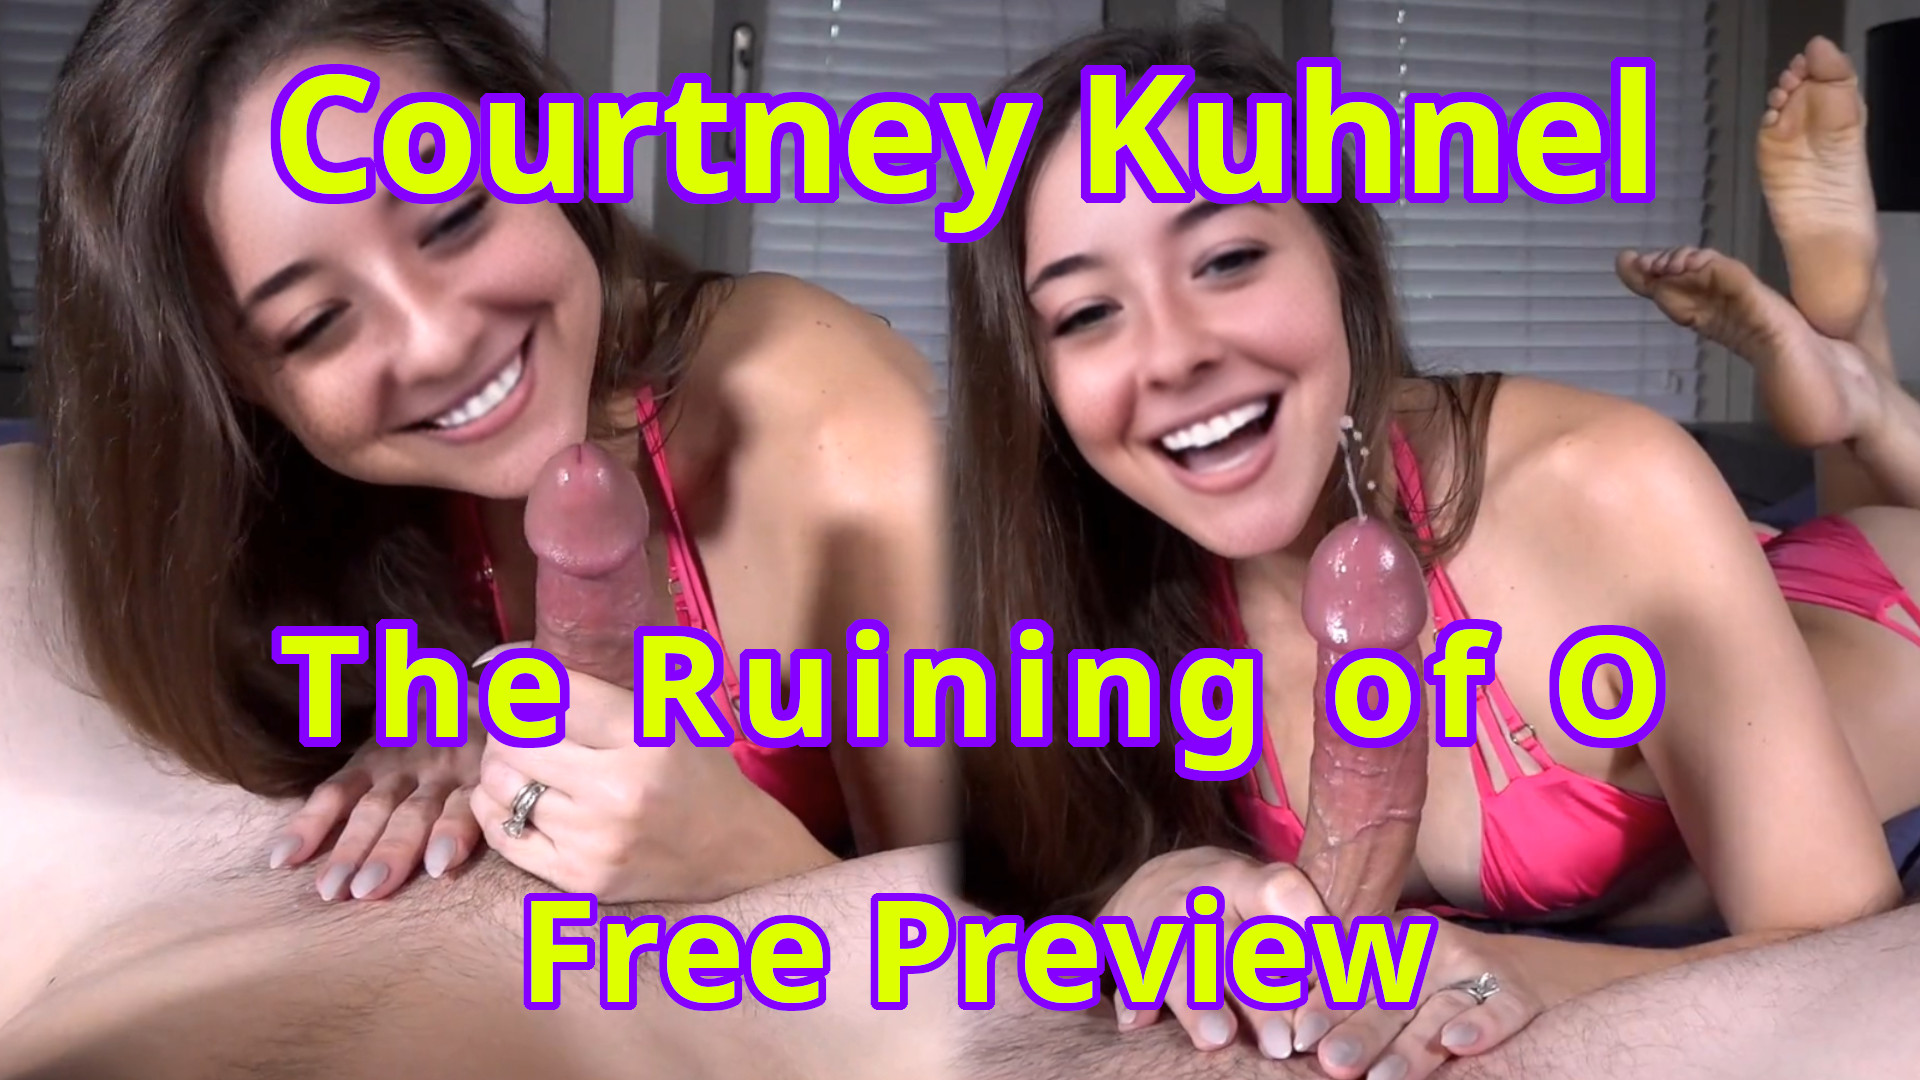 Courtney Kuhnel - The Ruining of O | Free Preview